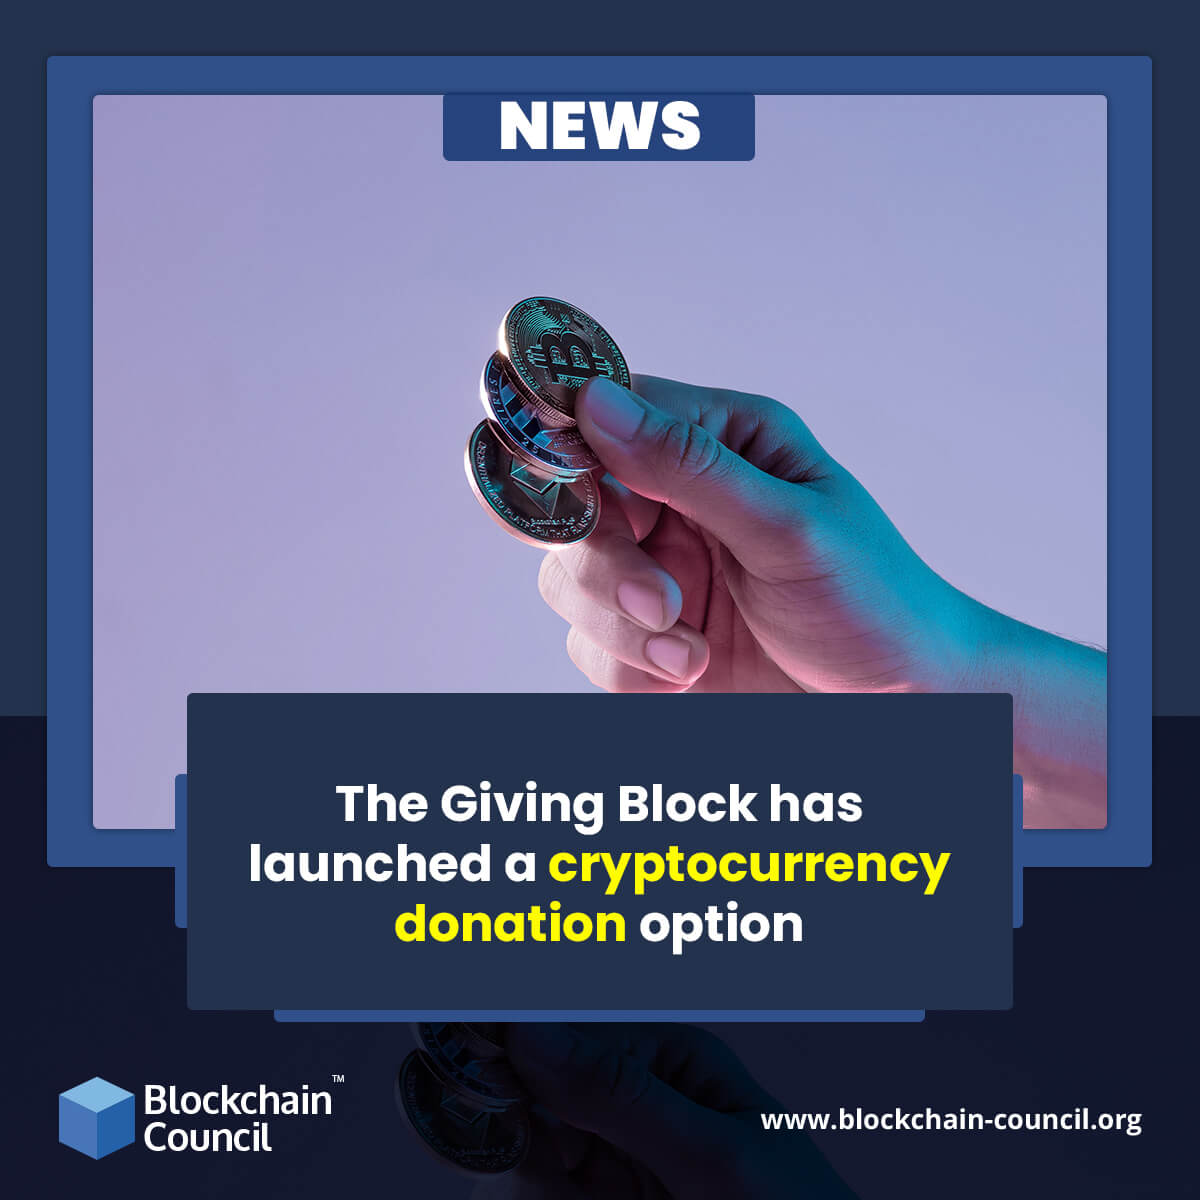 The Giving Block has launched a cryptocurrency donation option